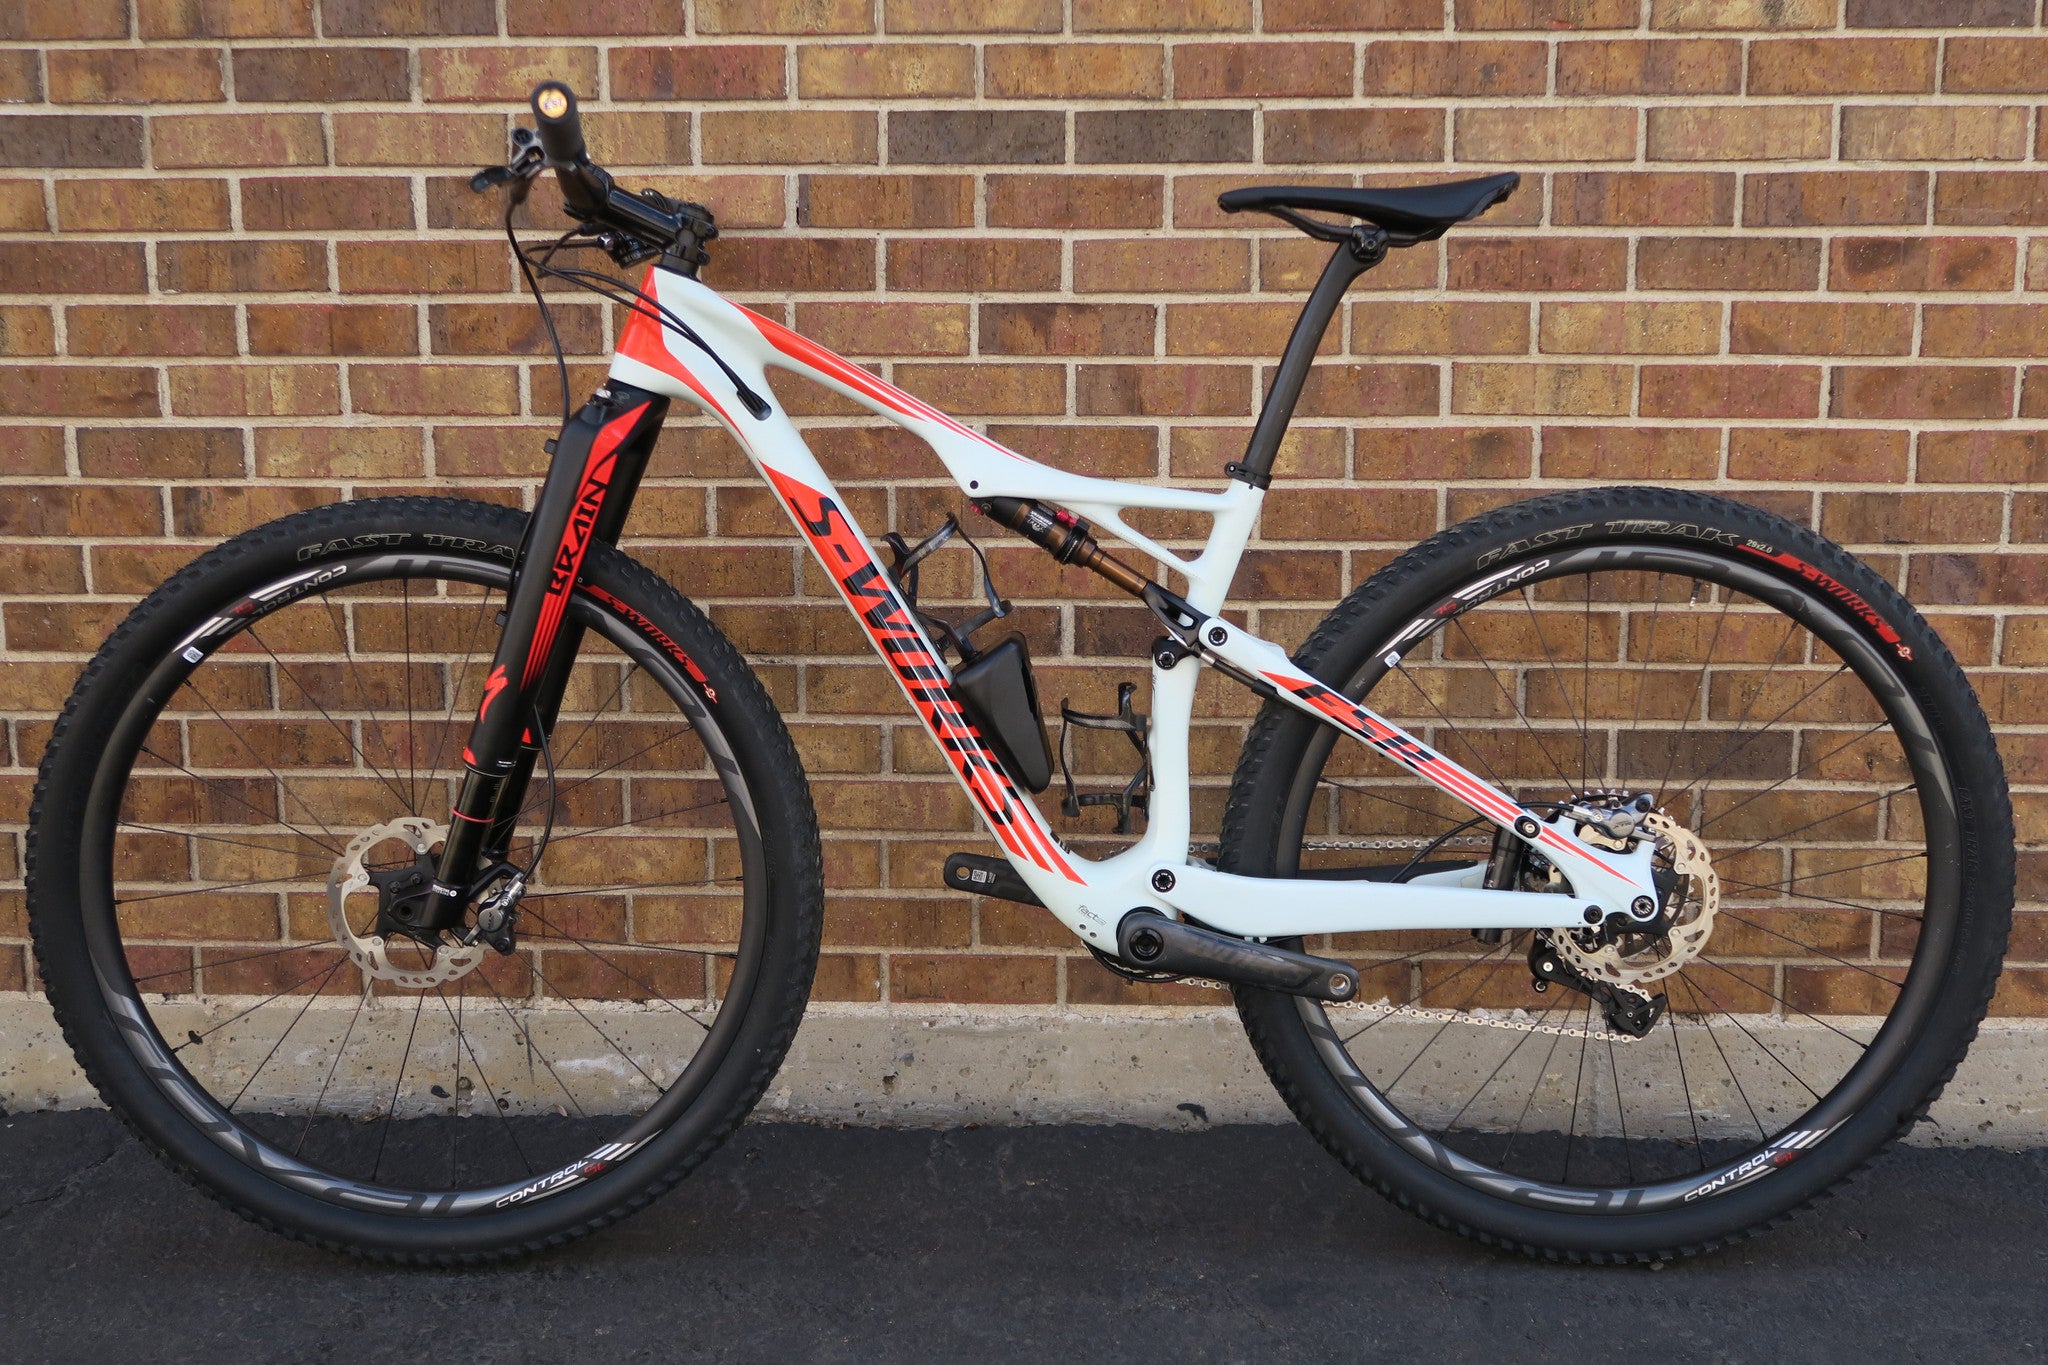 2016 S-WORKS EPIC WORLD CUP 29